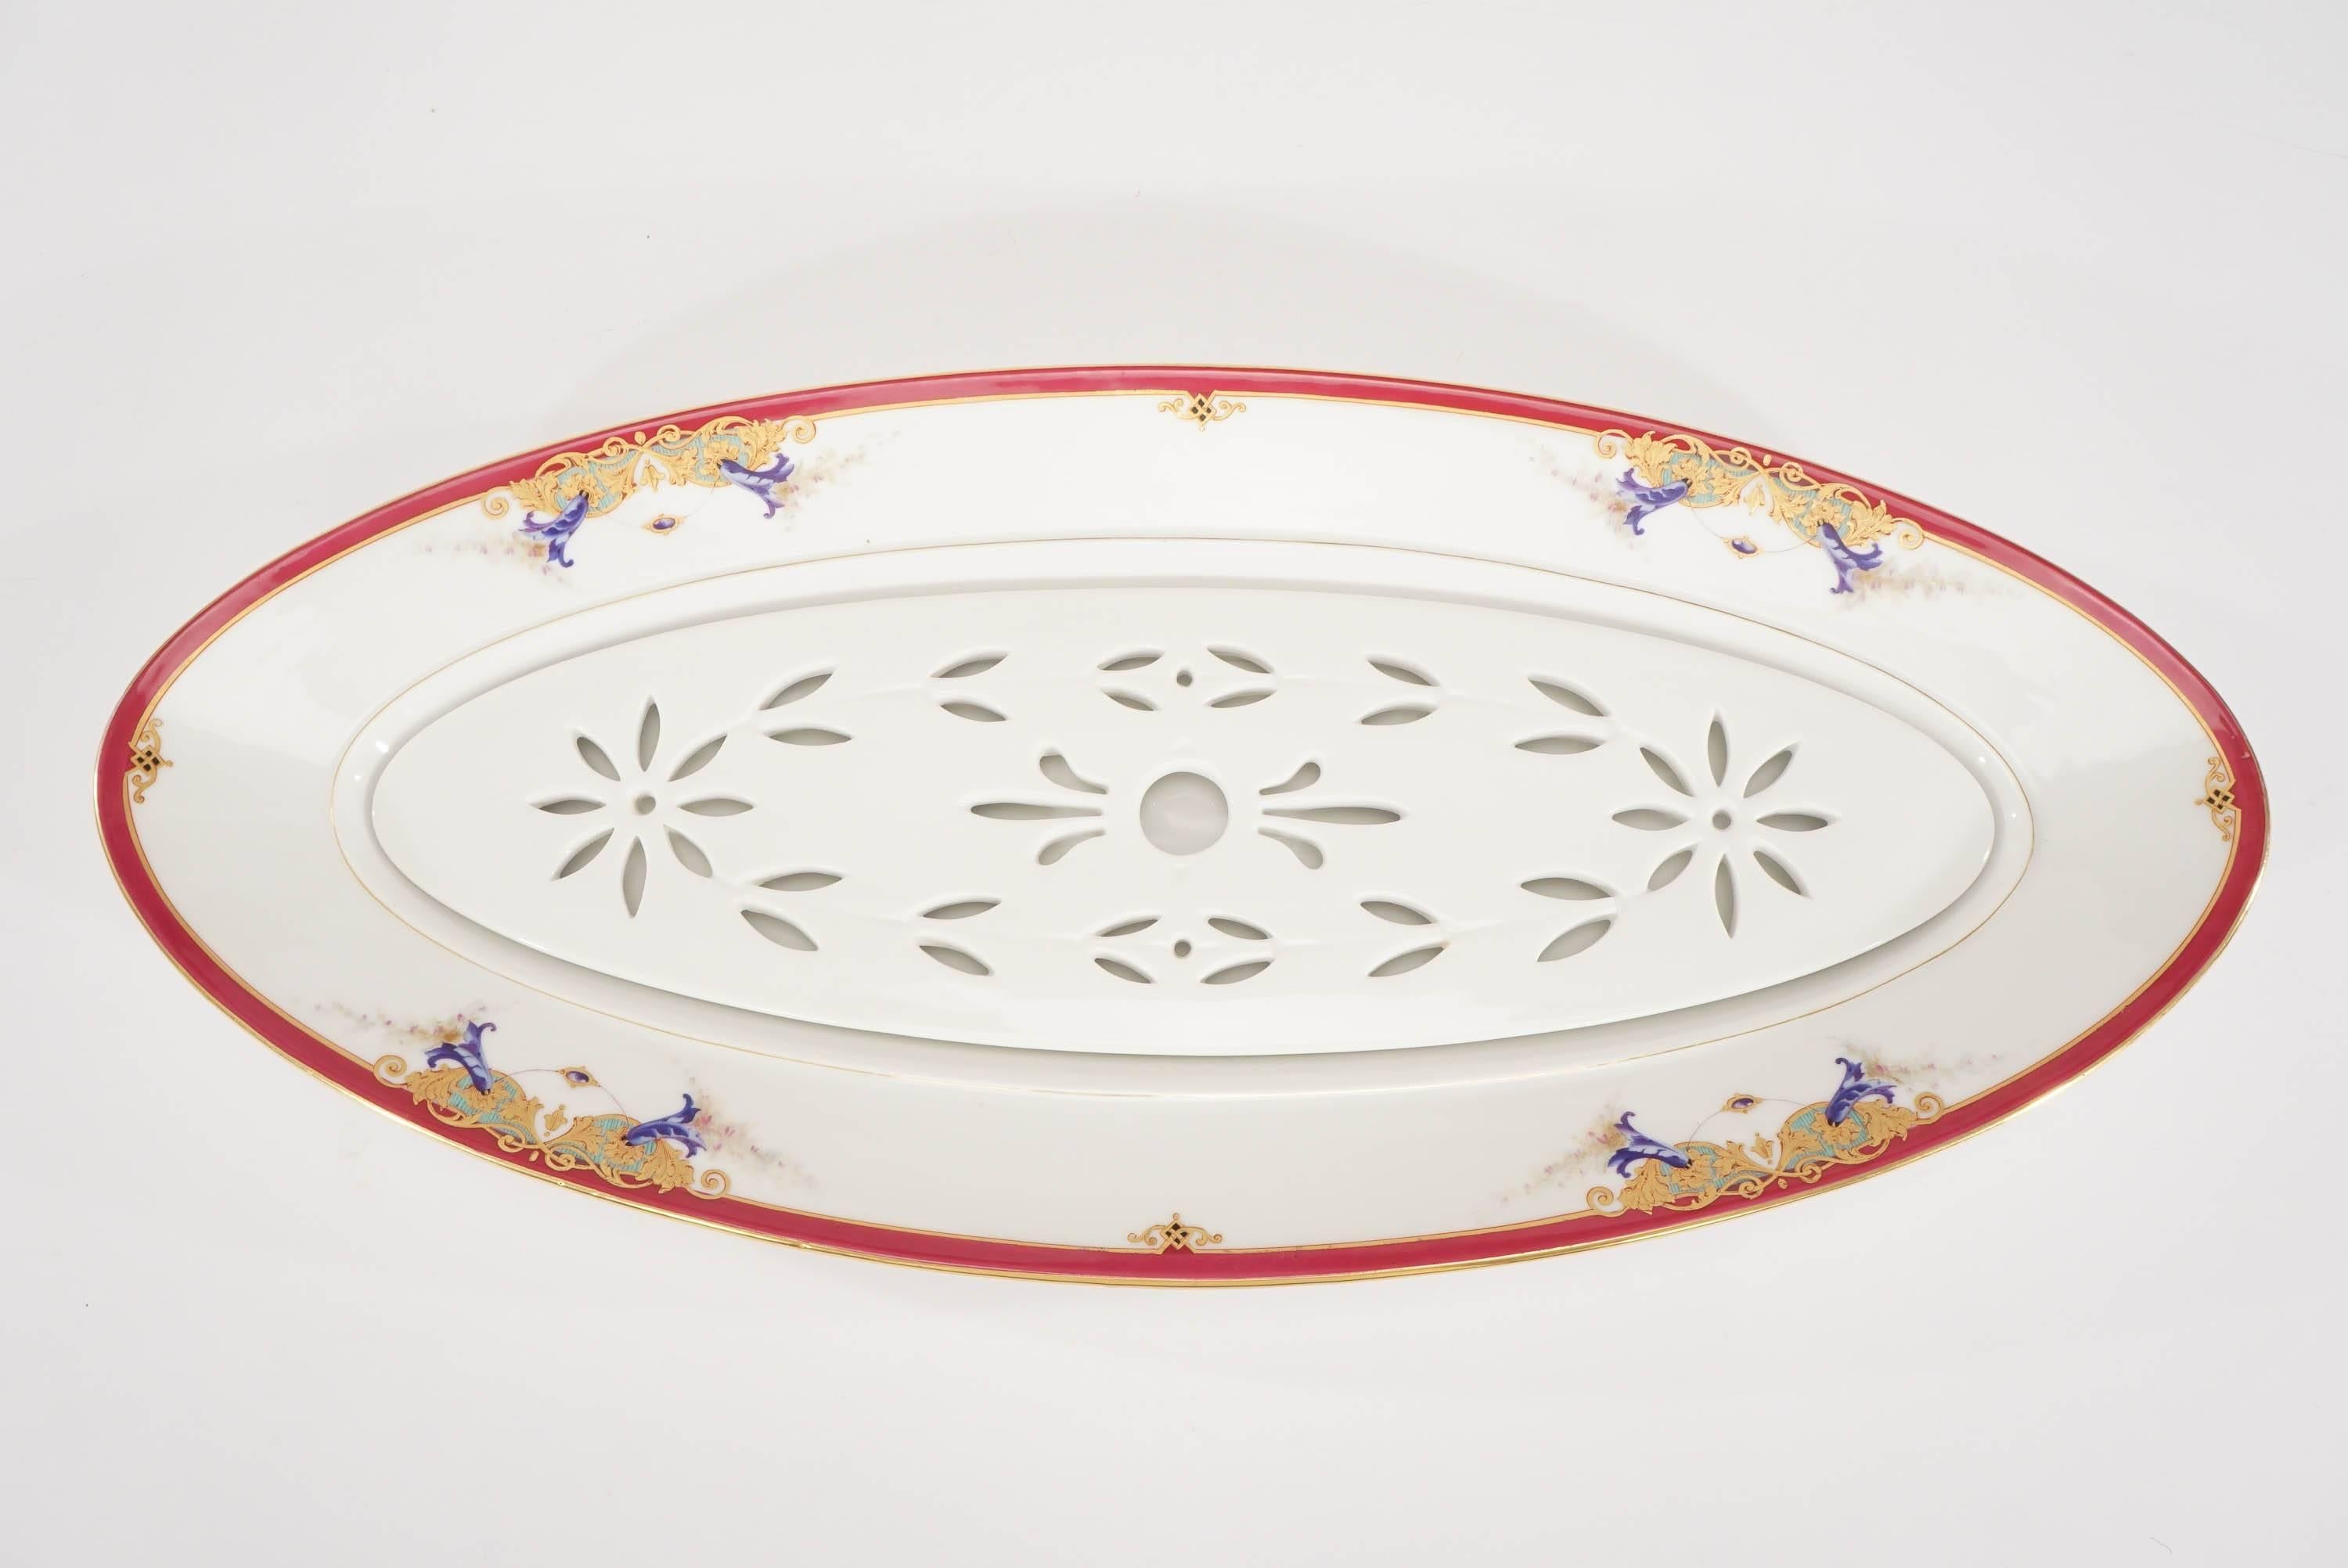 This distinctive and large elongated fish platter is perfect for serving your favorite fish in style. The removable pierced strainer/drainer will keep your cooked fish easily accessible for serving and it also a wonderful serving piece for a smoked